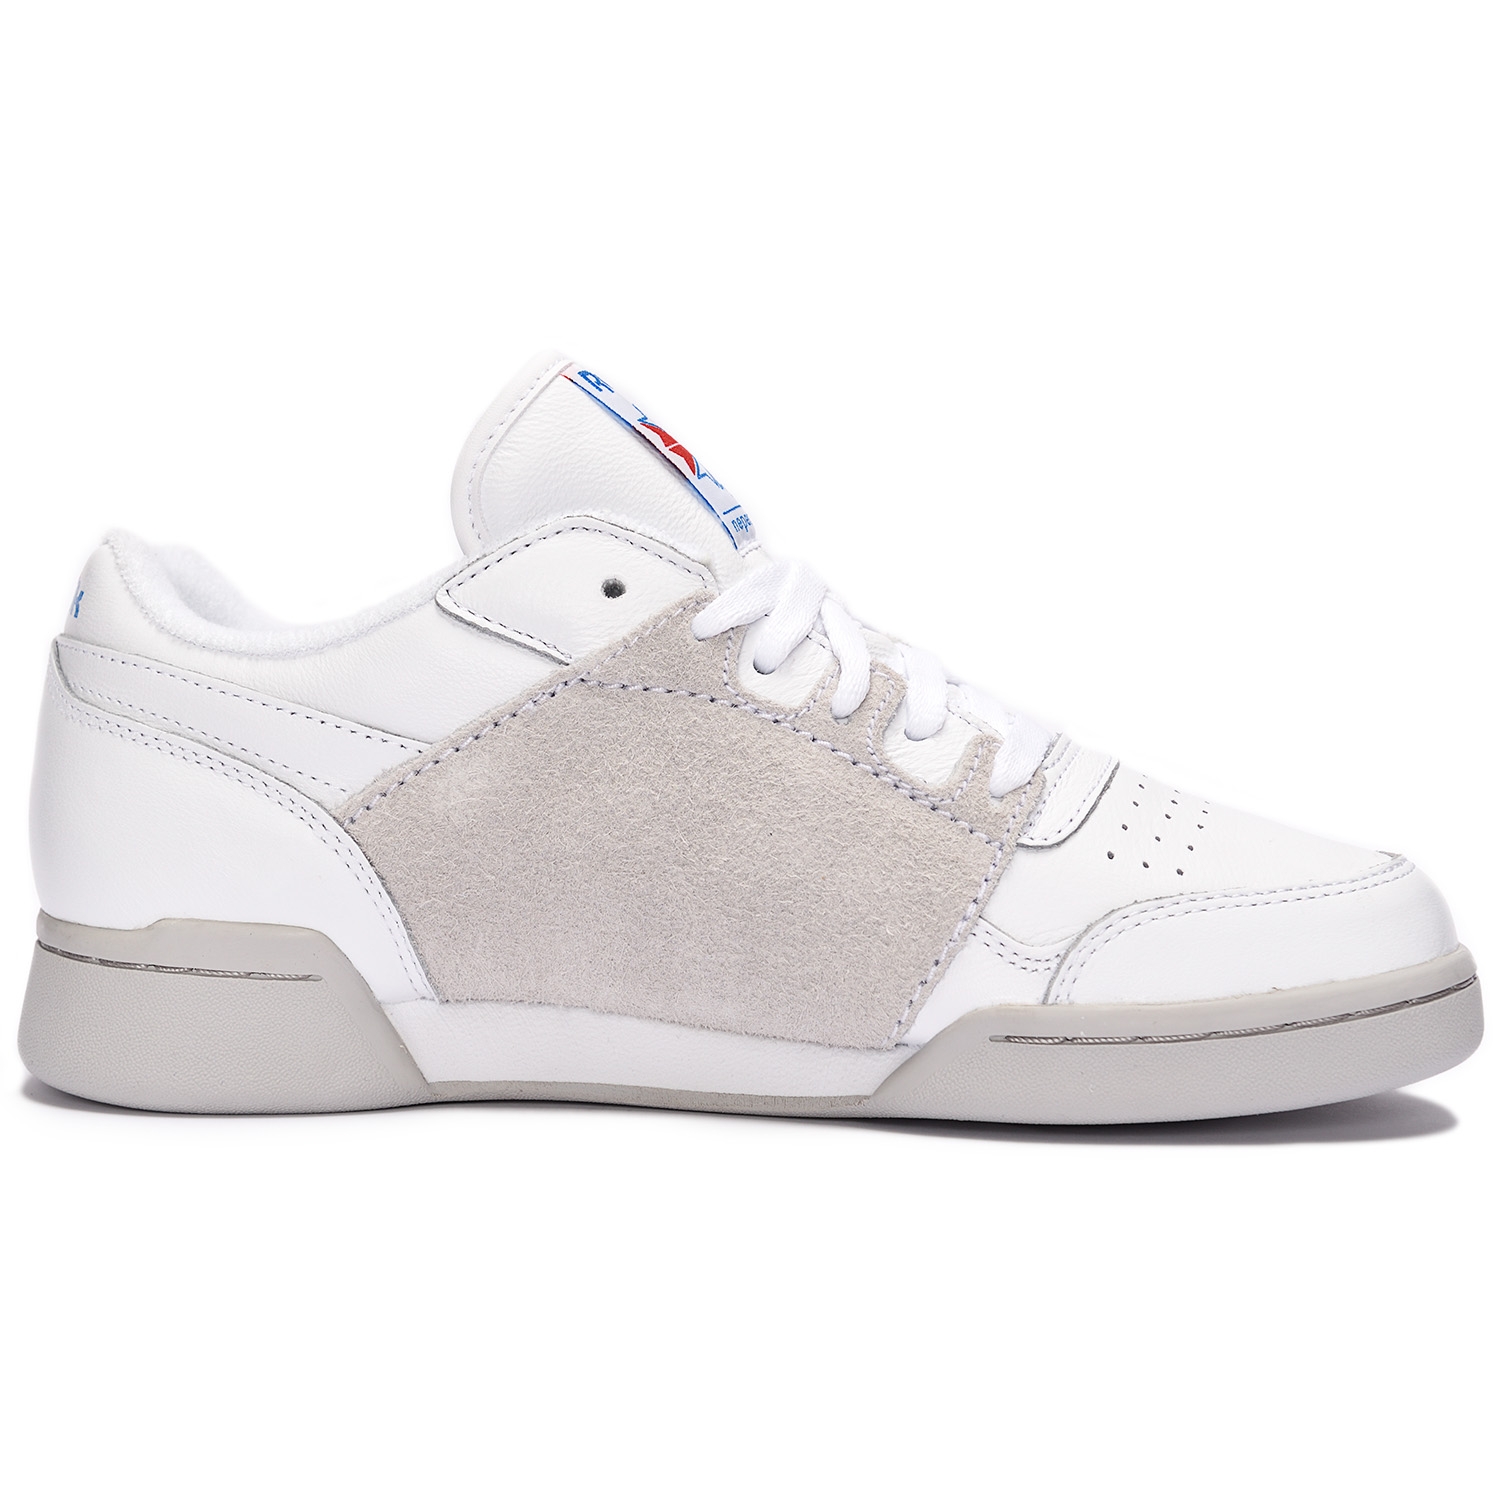 REEBOK X NEPENTHES NY WHITE/STEEL/BLUE/CORE